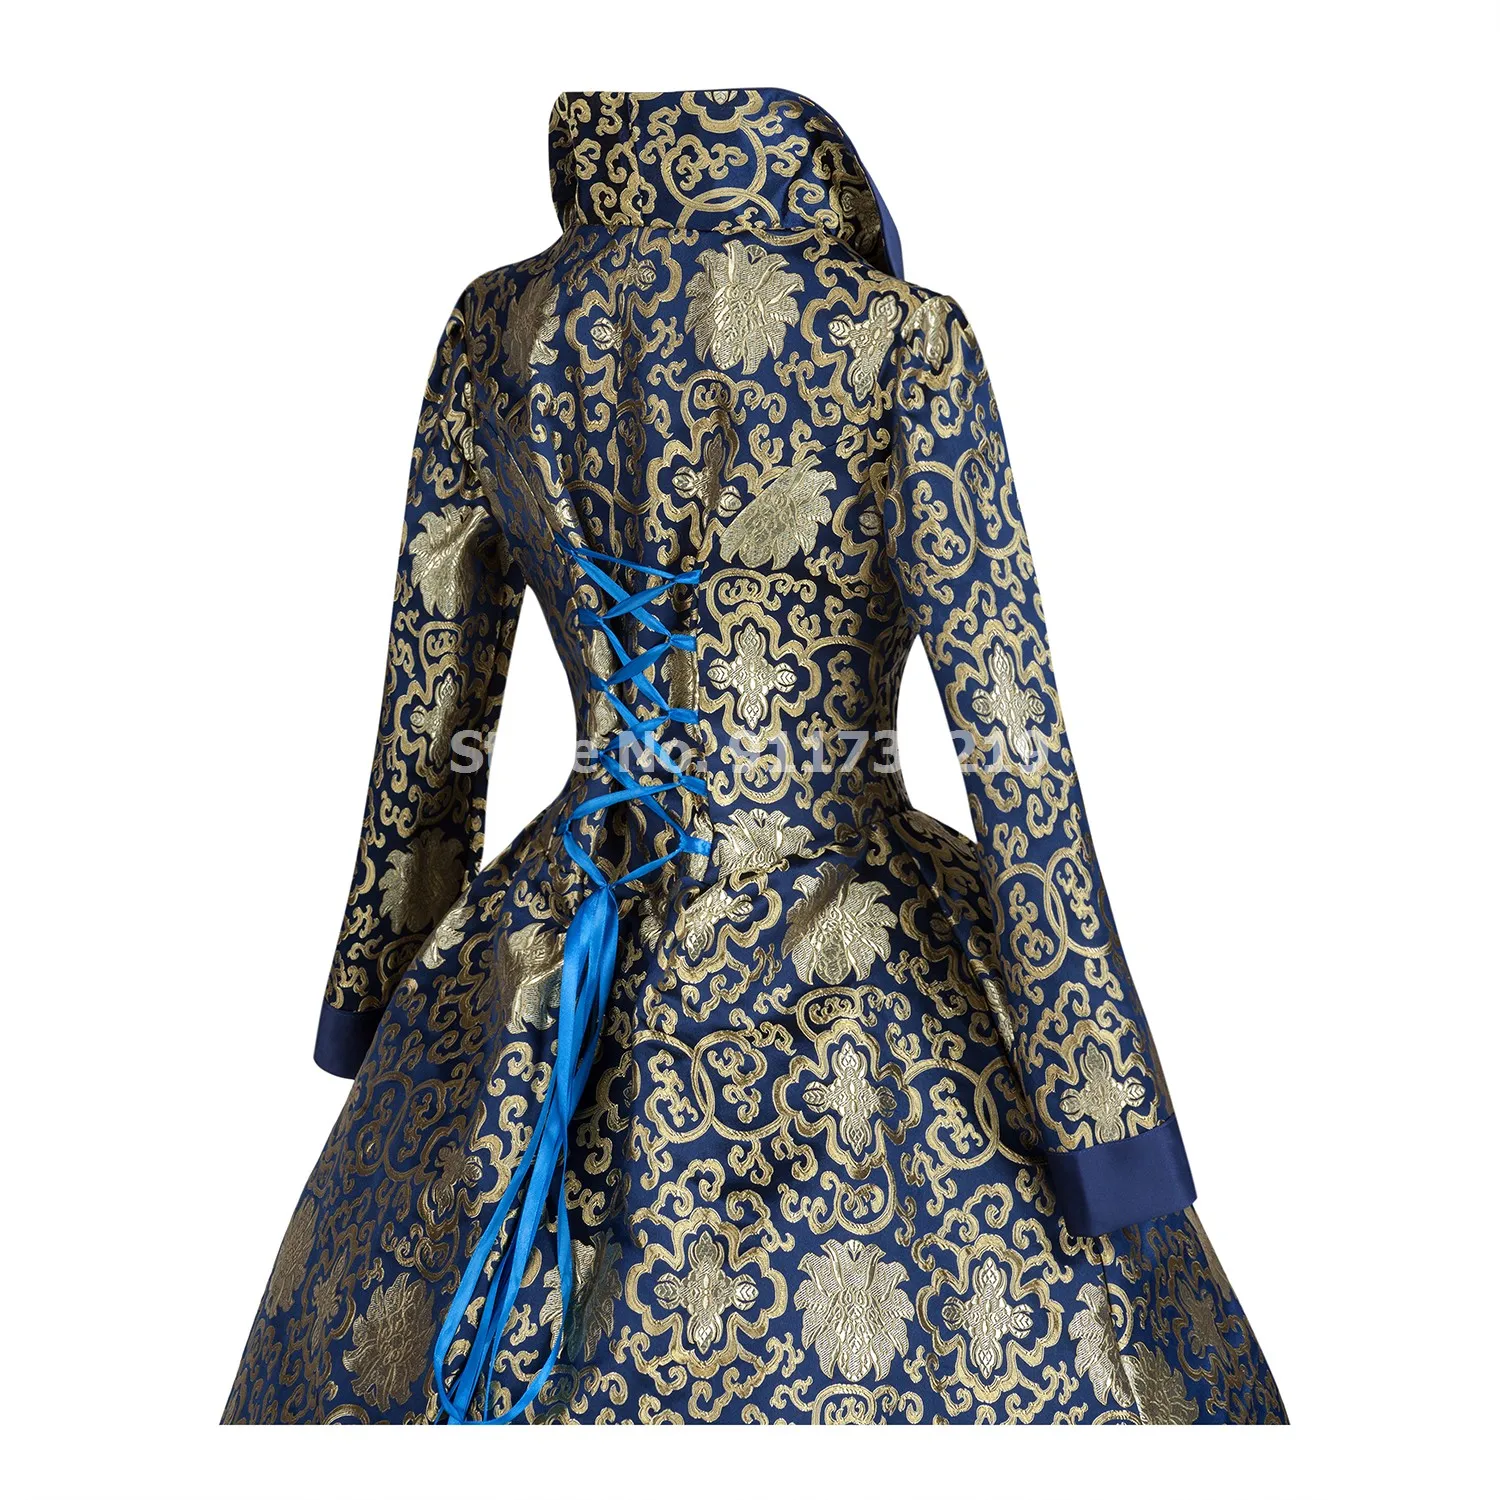 Blue with Gold Brocade Baroque Frock Coat with Gold Floral